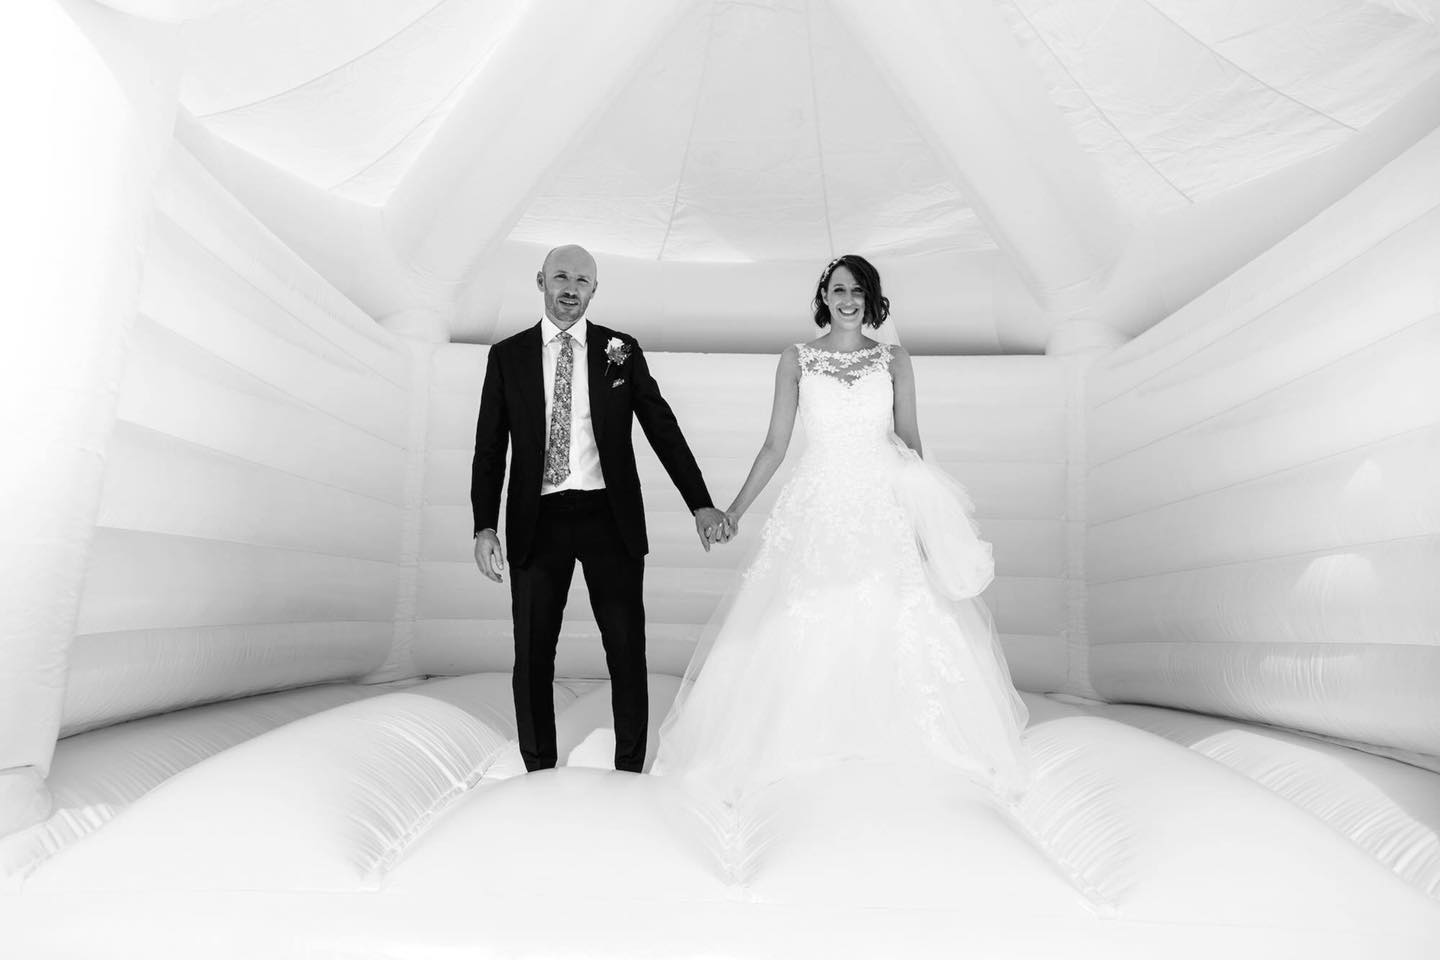 A gorgeous image from a wedding reception of the bride and groom standing hand in hand on a white bouncy castle